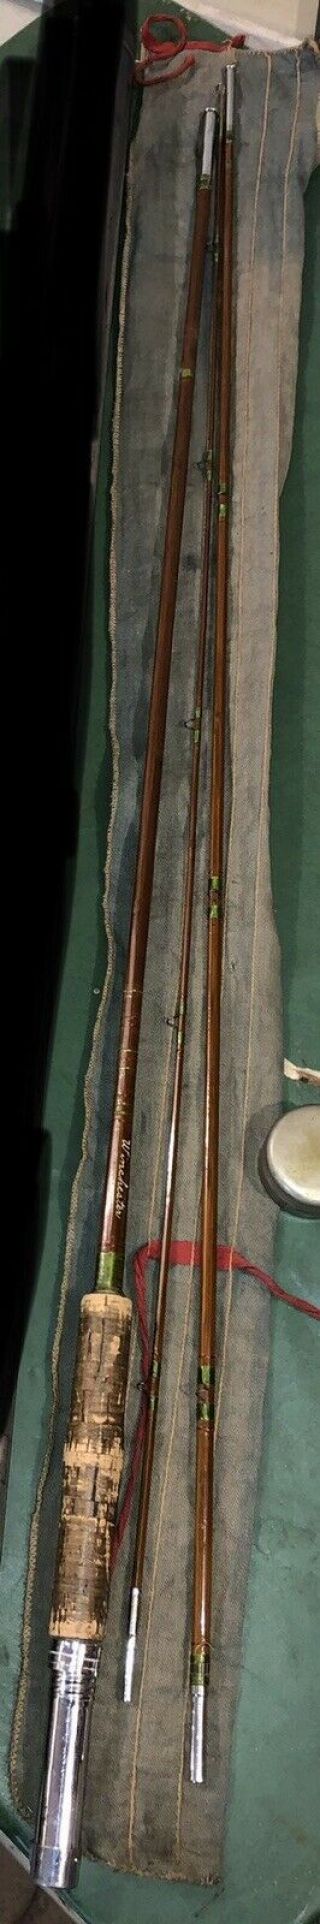 Vintage Winchester " Pomperaug " 3 Piece Bamboo Fly Fish Rod W/ Sleeve Very Rare